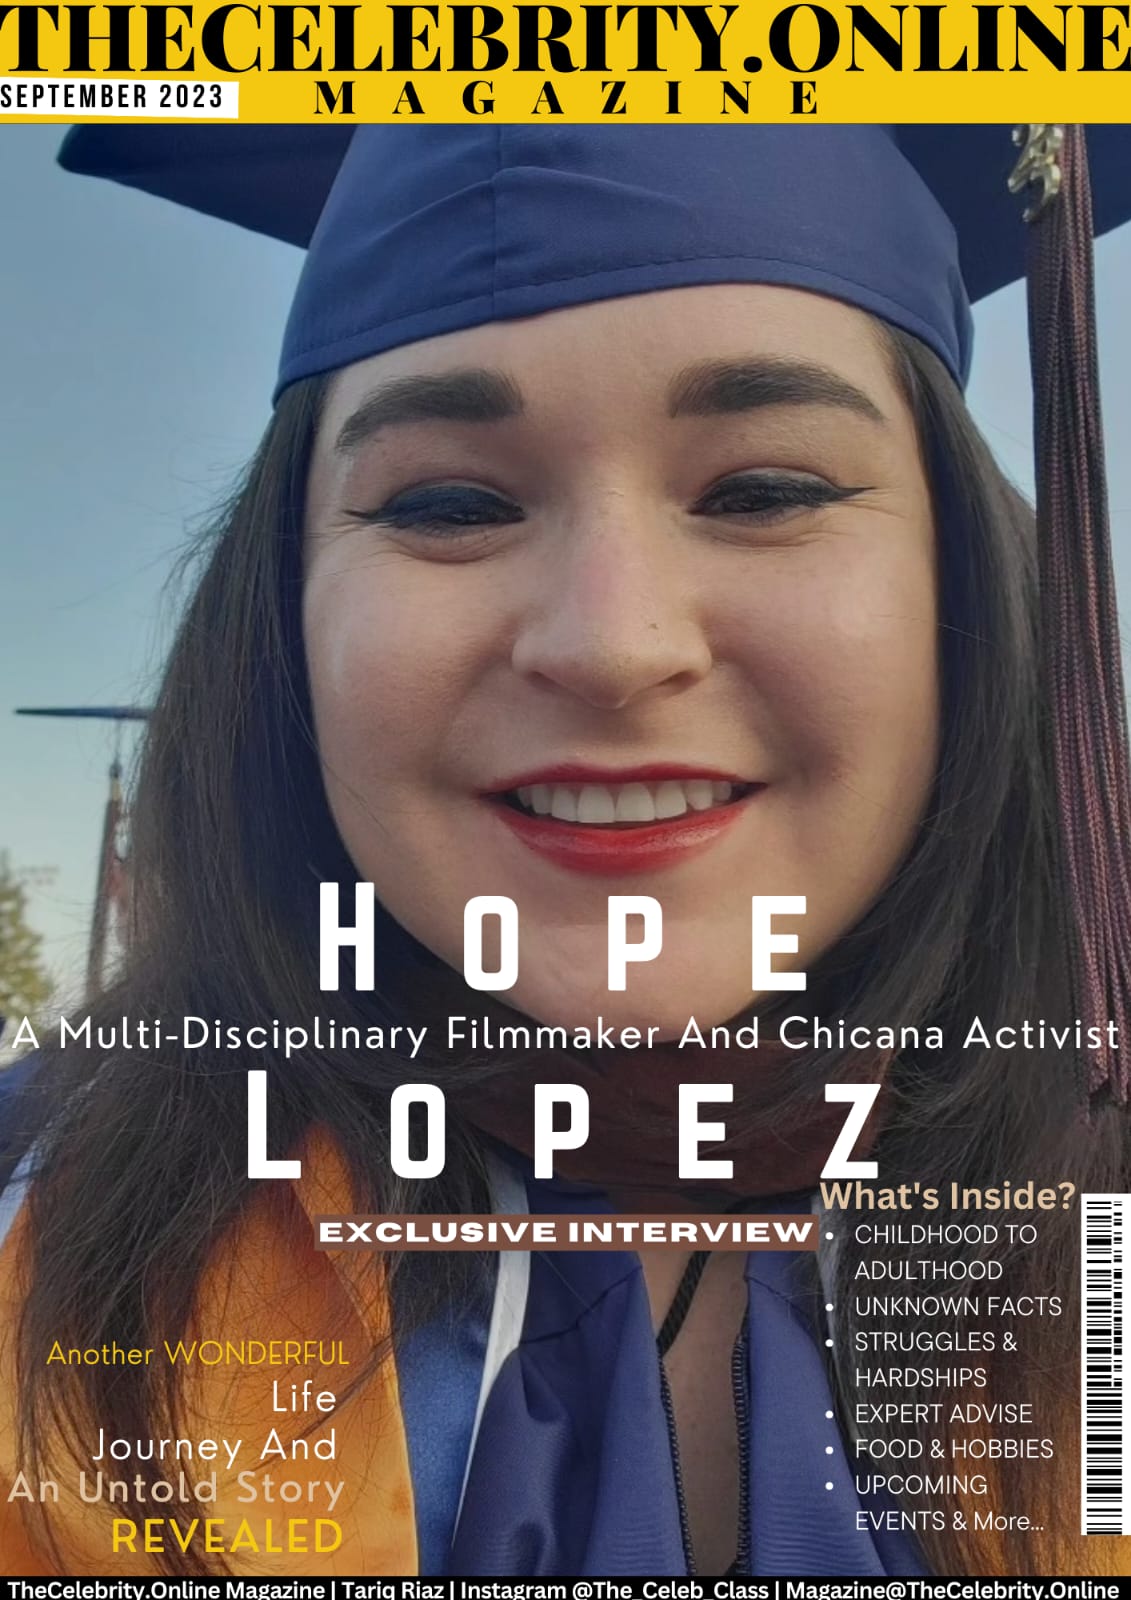 Hope Lopez Exclusive Interview – ‘It’s Not About You. It’s About The Story’